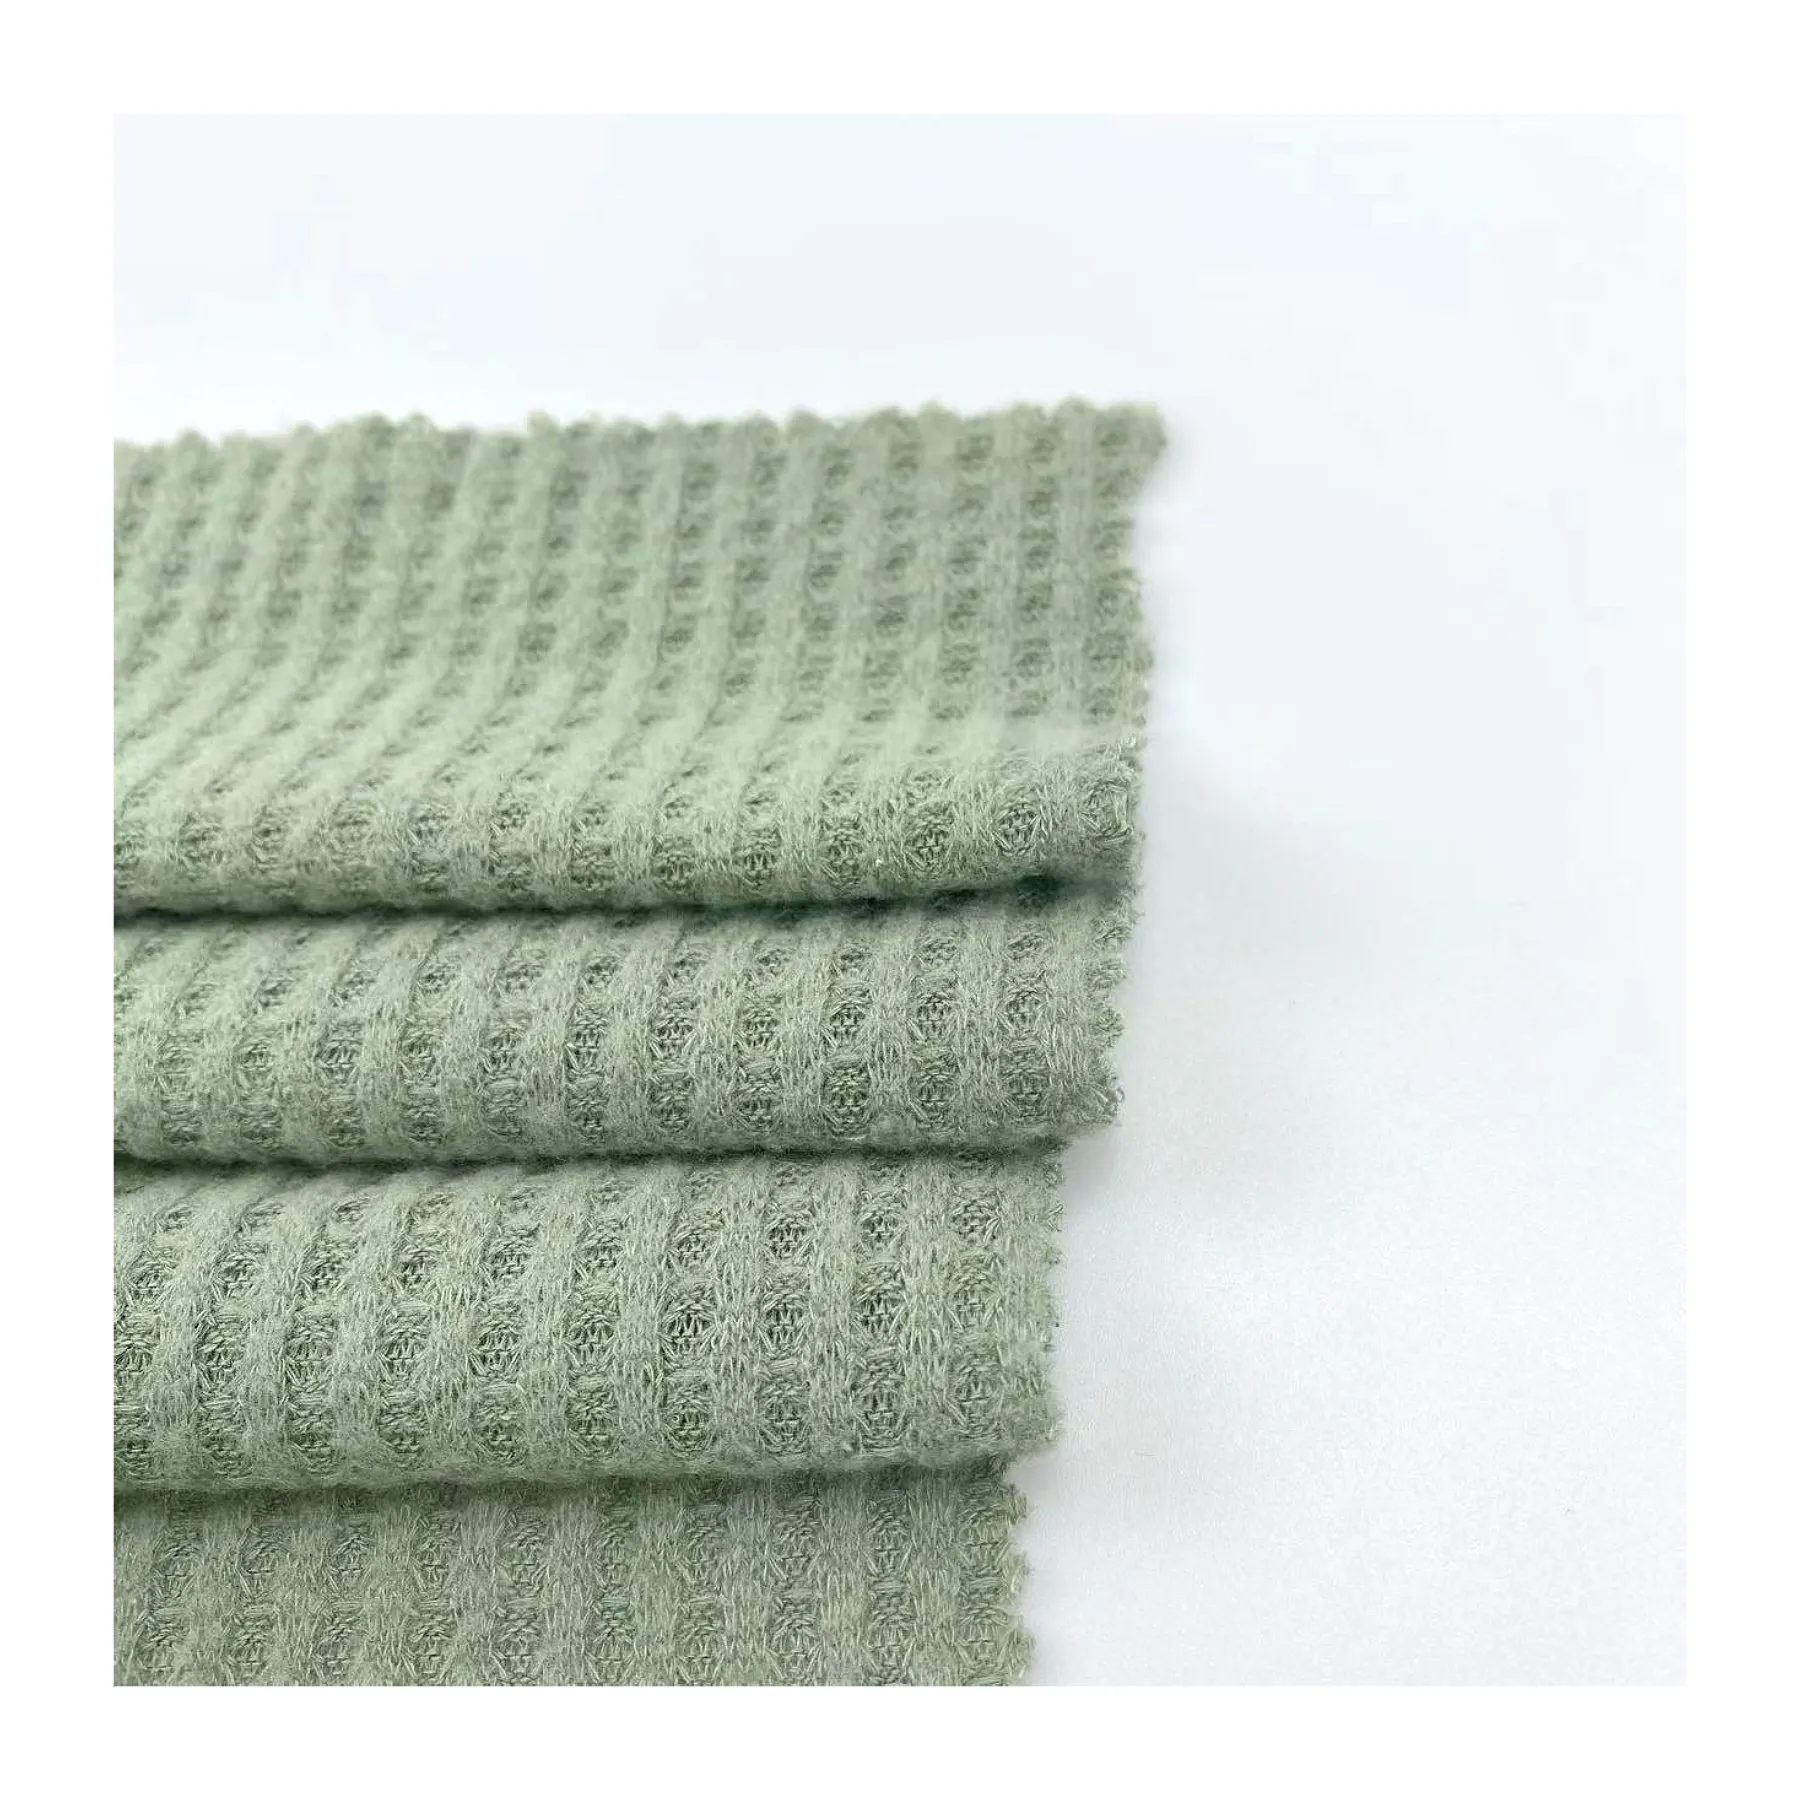 Knitted fabric polyester rayon cotton 3 spandex fabric for women's clothing vests or jackets